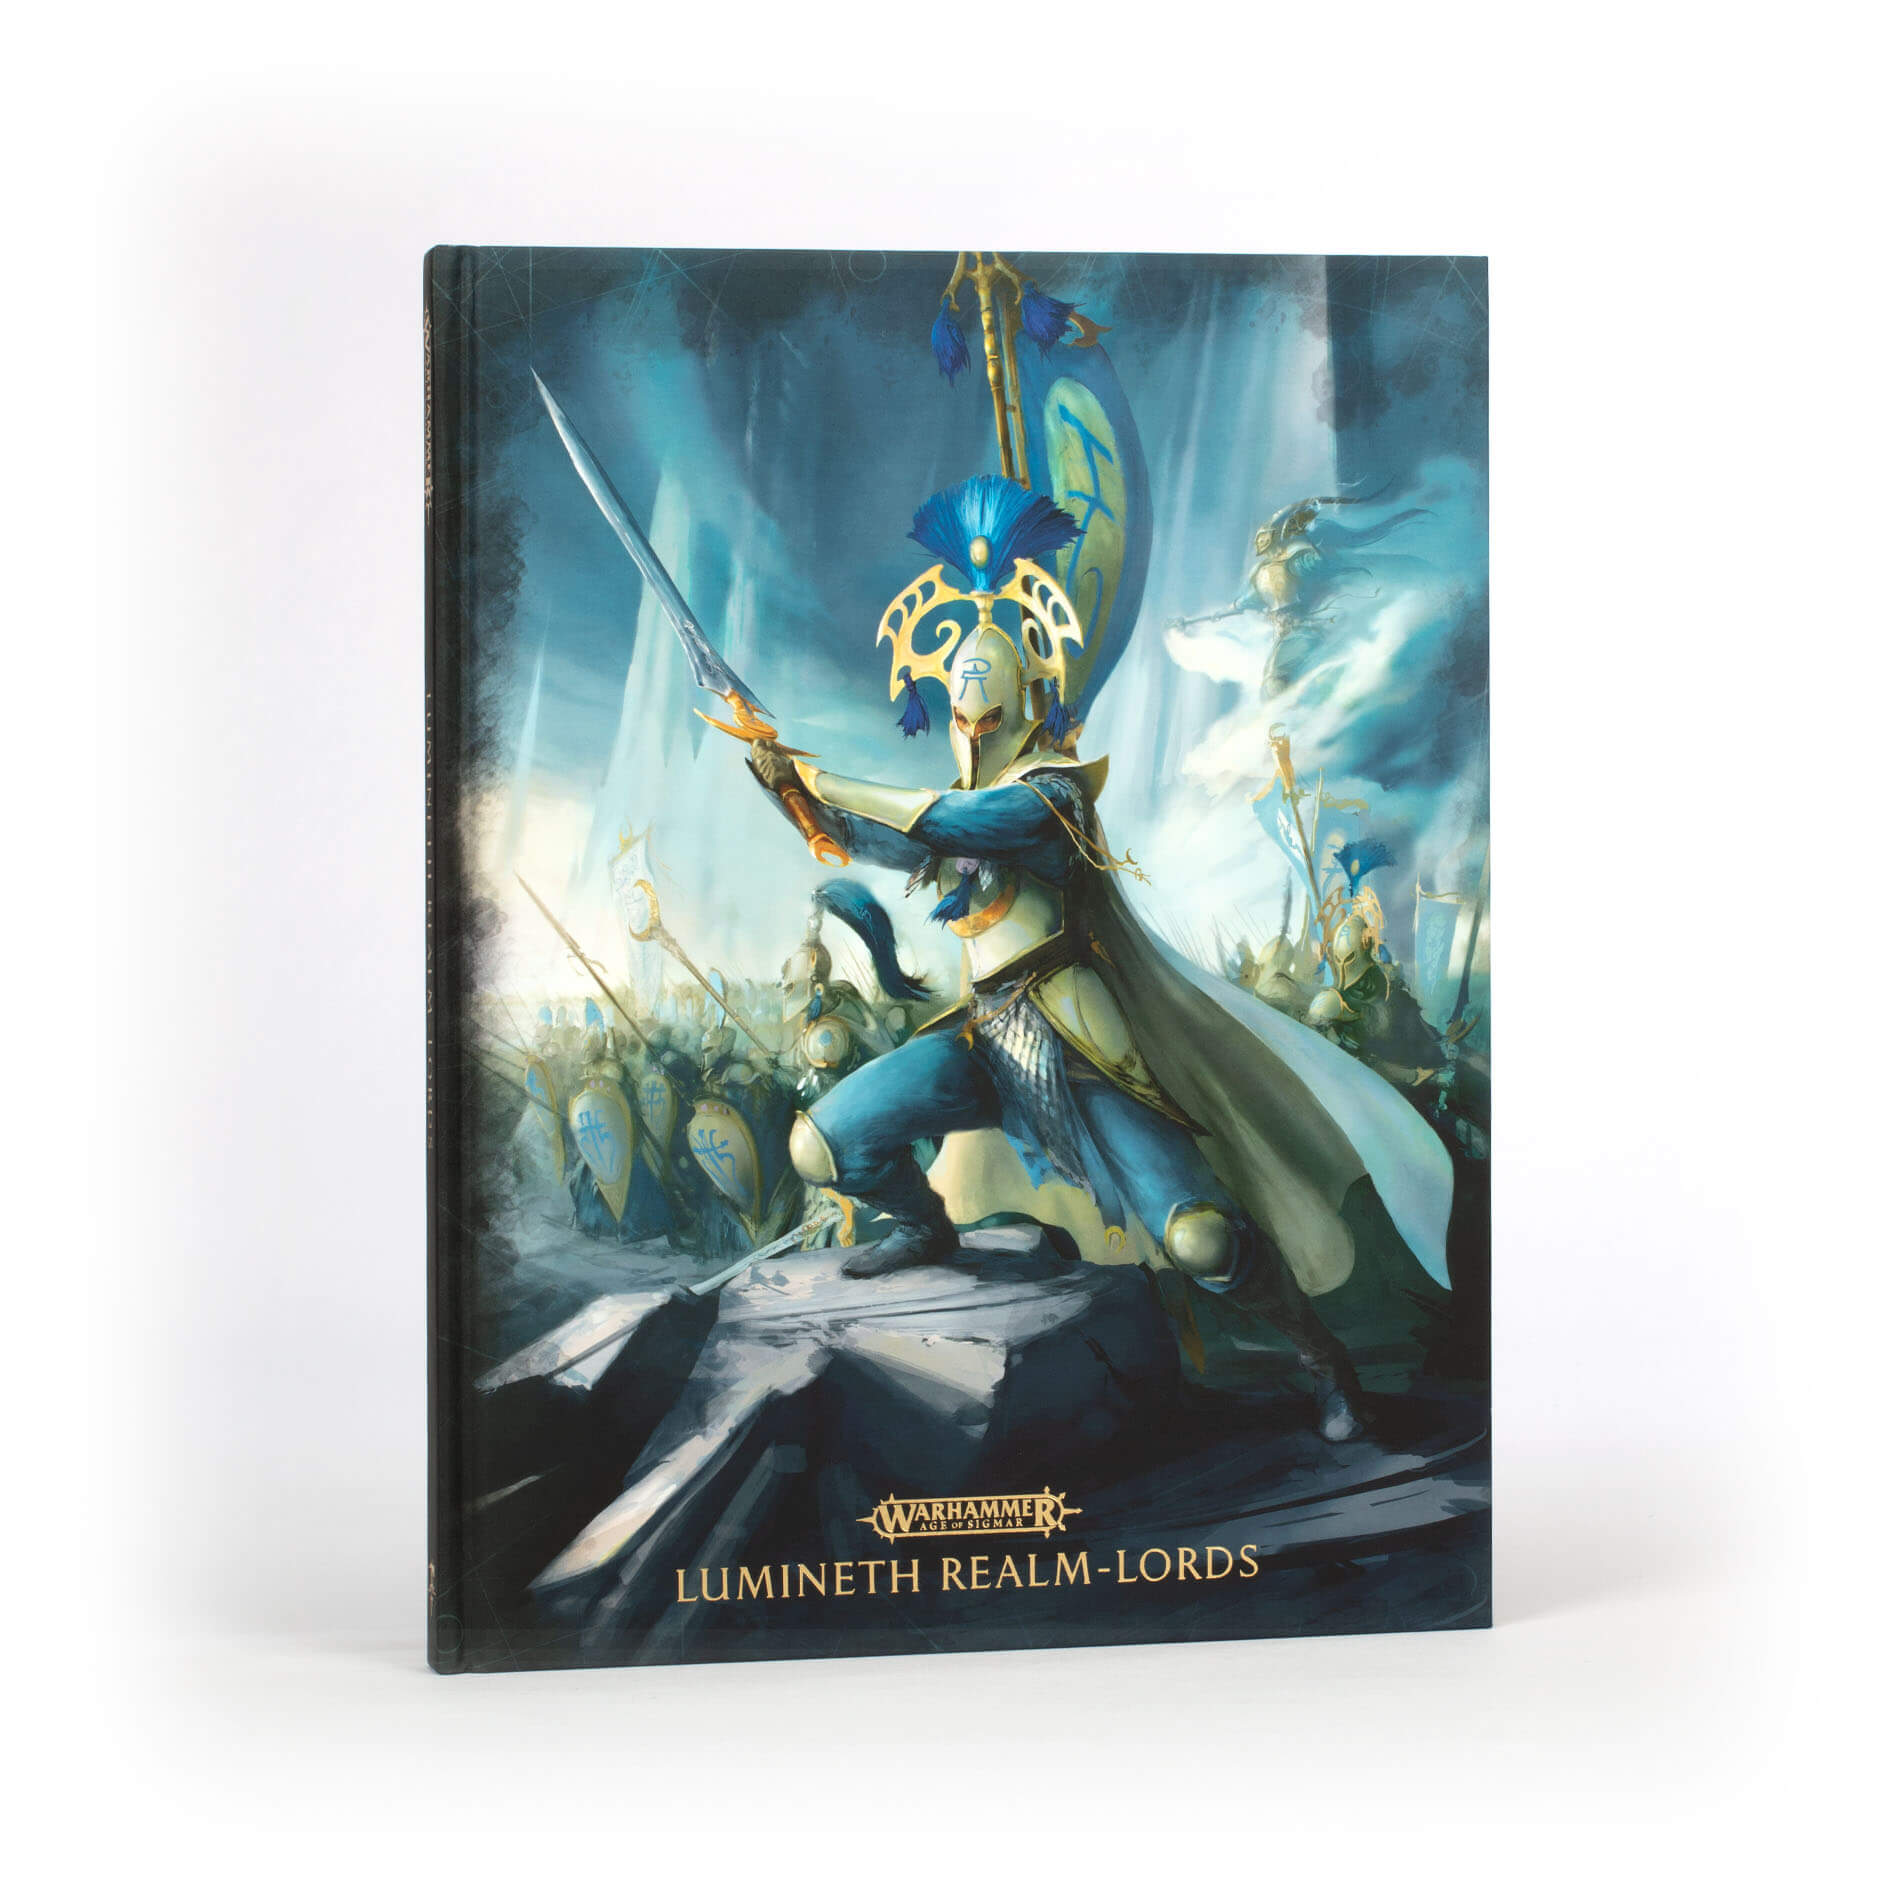 Warhammer Age of Sigmar Order Battletome Lumineth Realm-Lords Hardcover